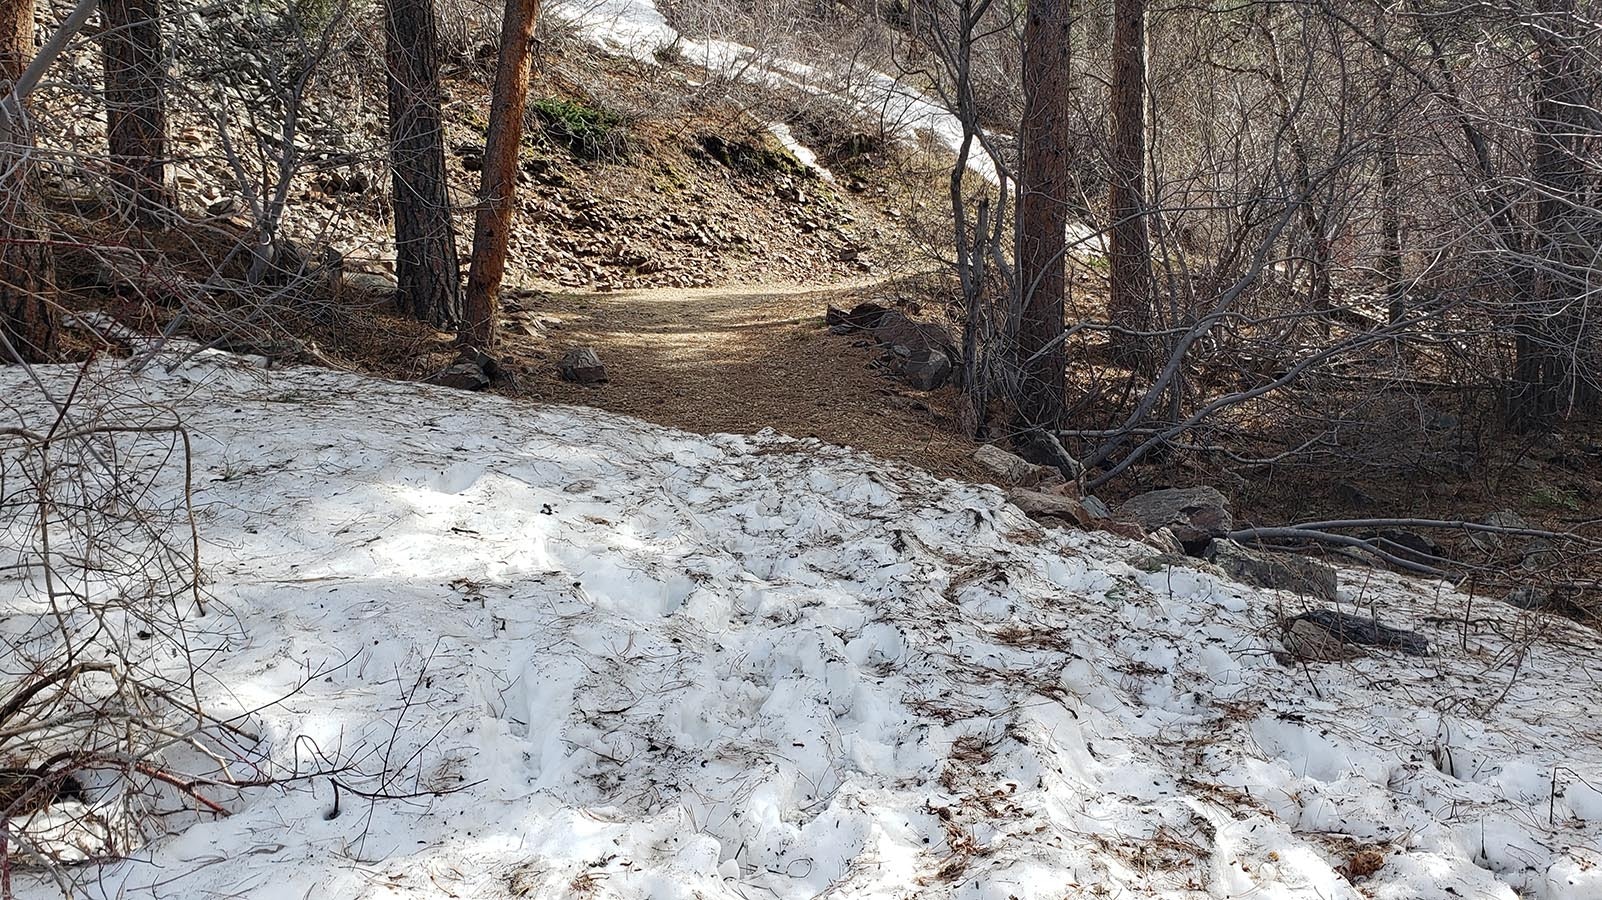 Snow still covers portions of the trail in early May.